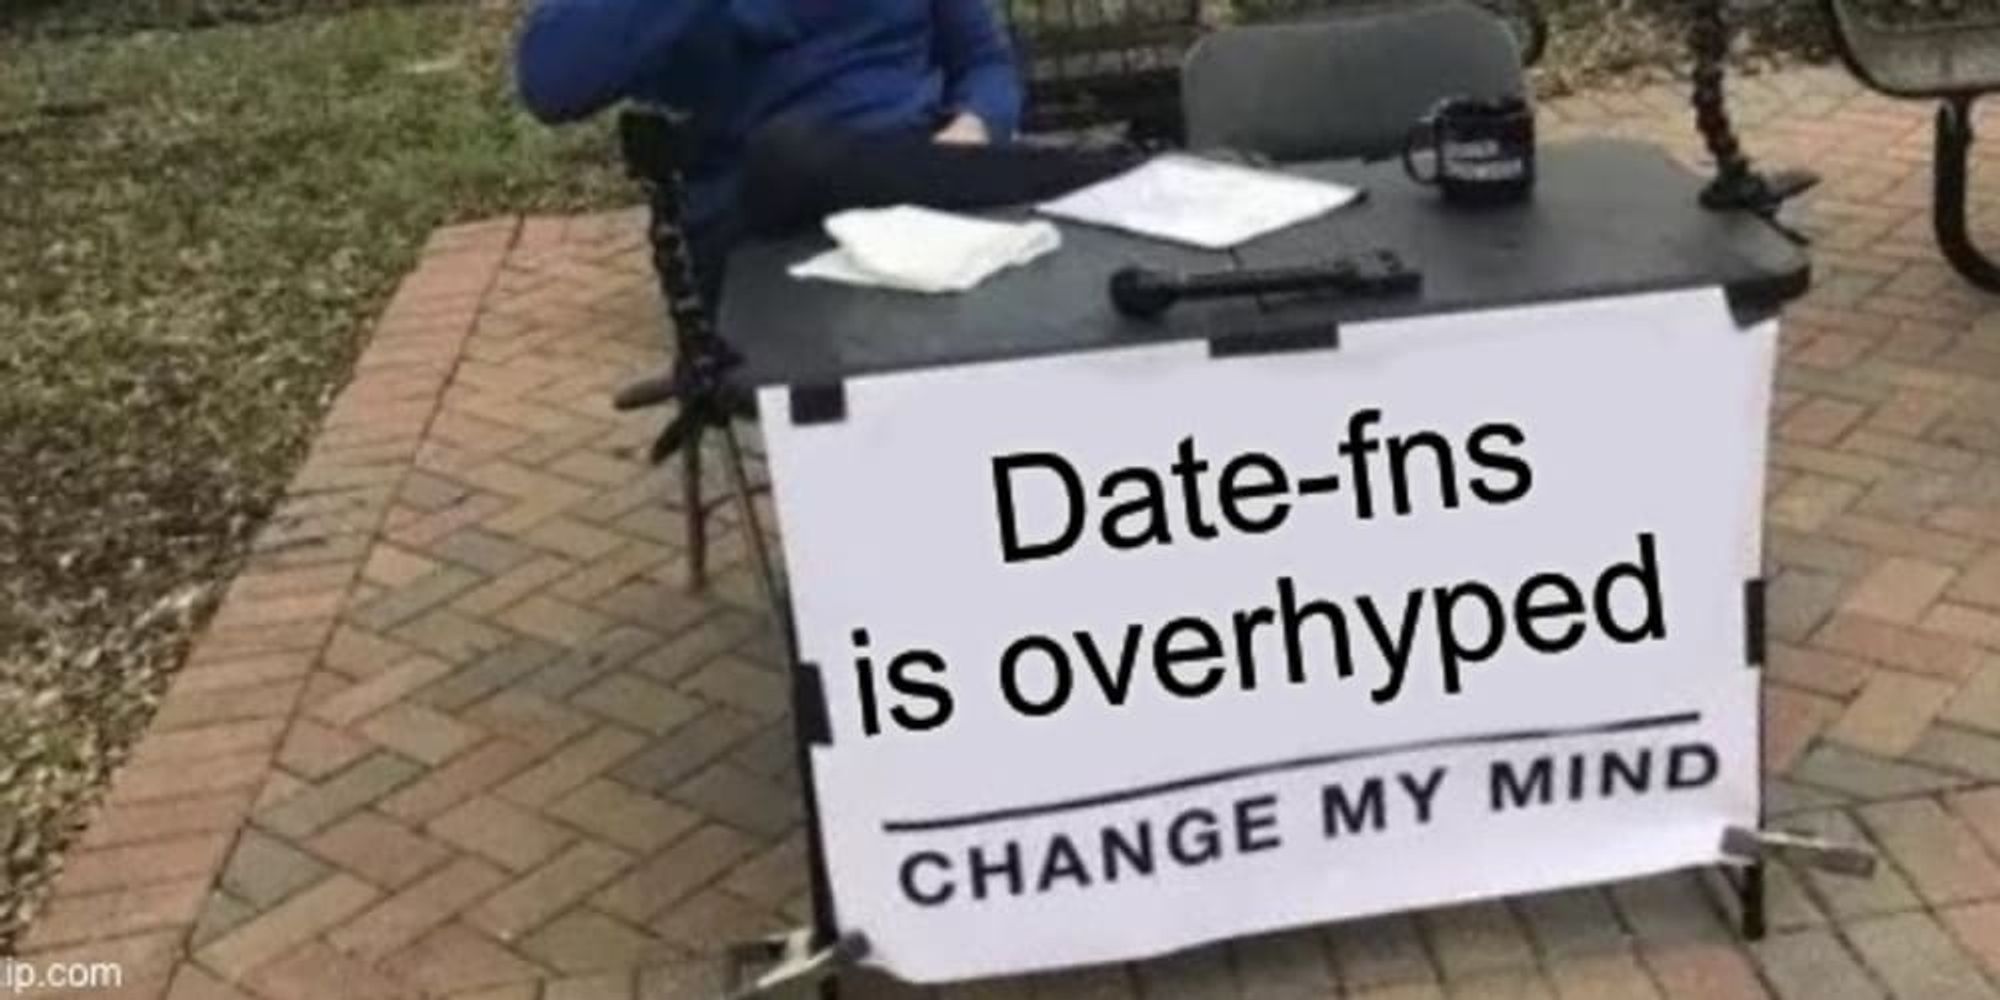 You might not need date-fns